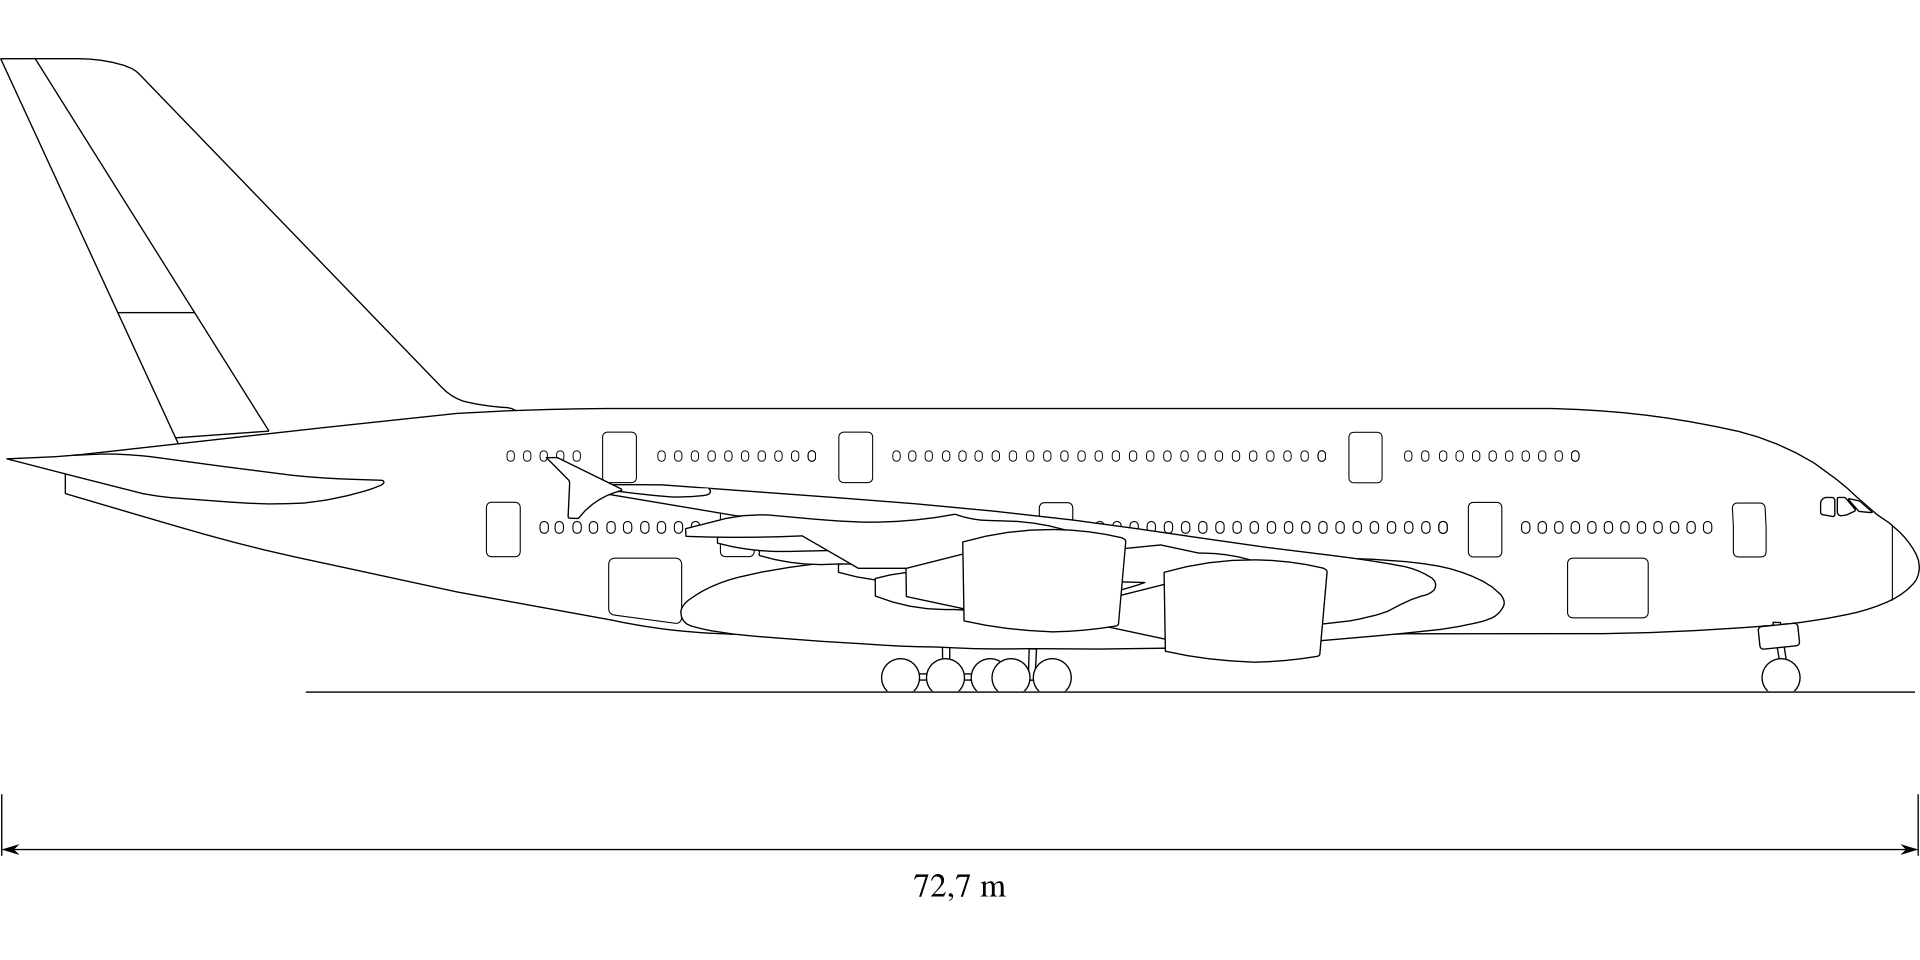 Airbus a380 profile drawing free image